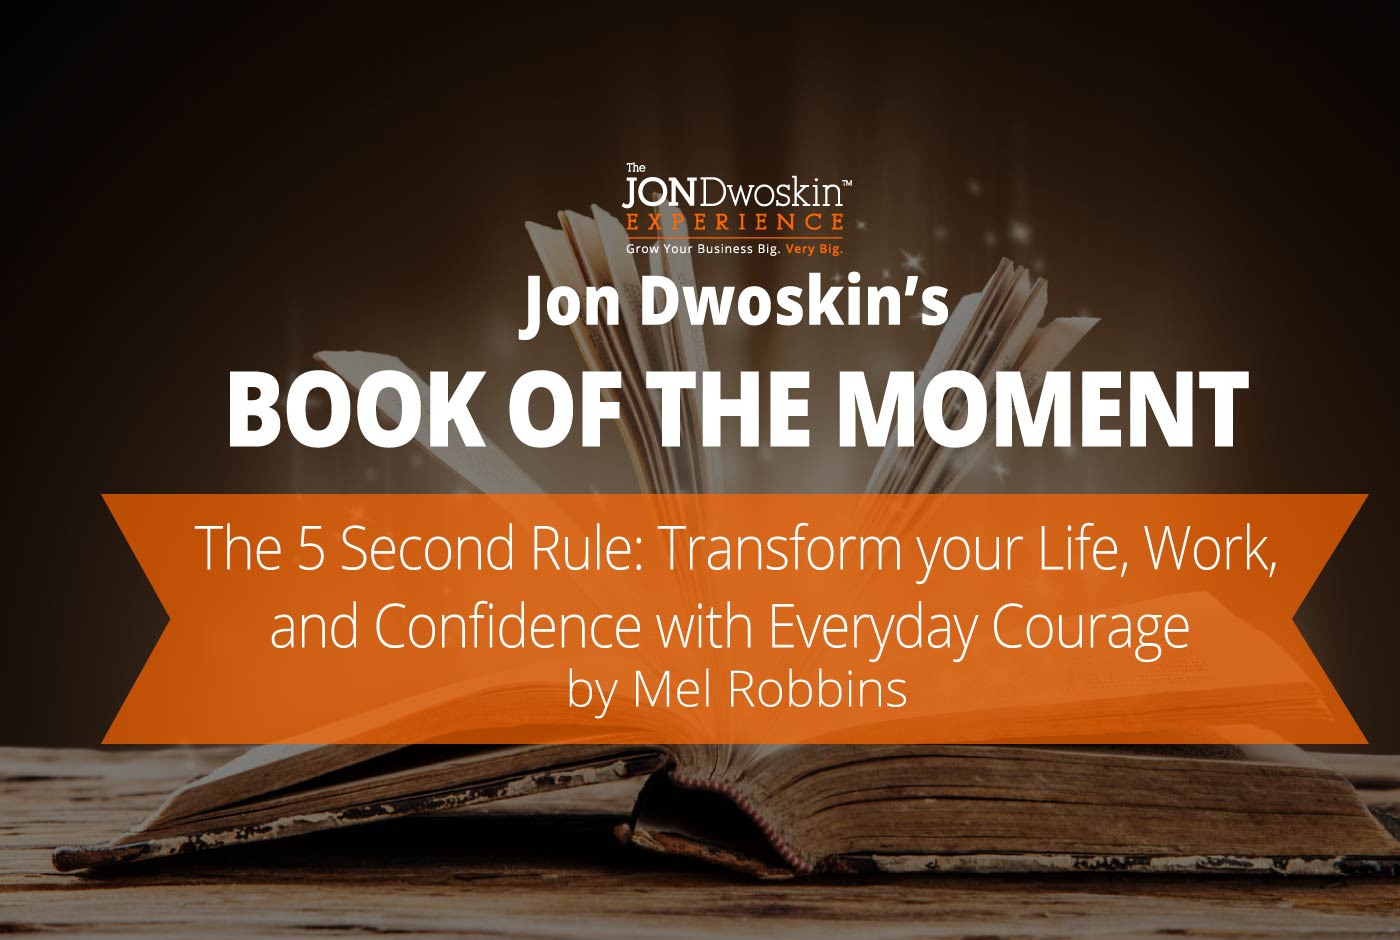 Jon Dwoskin's Book of the Month